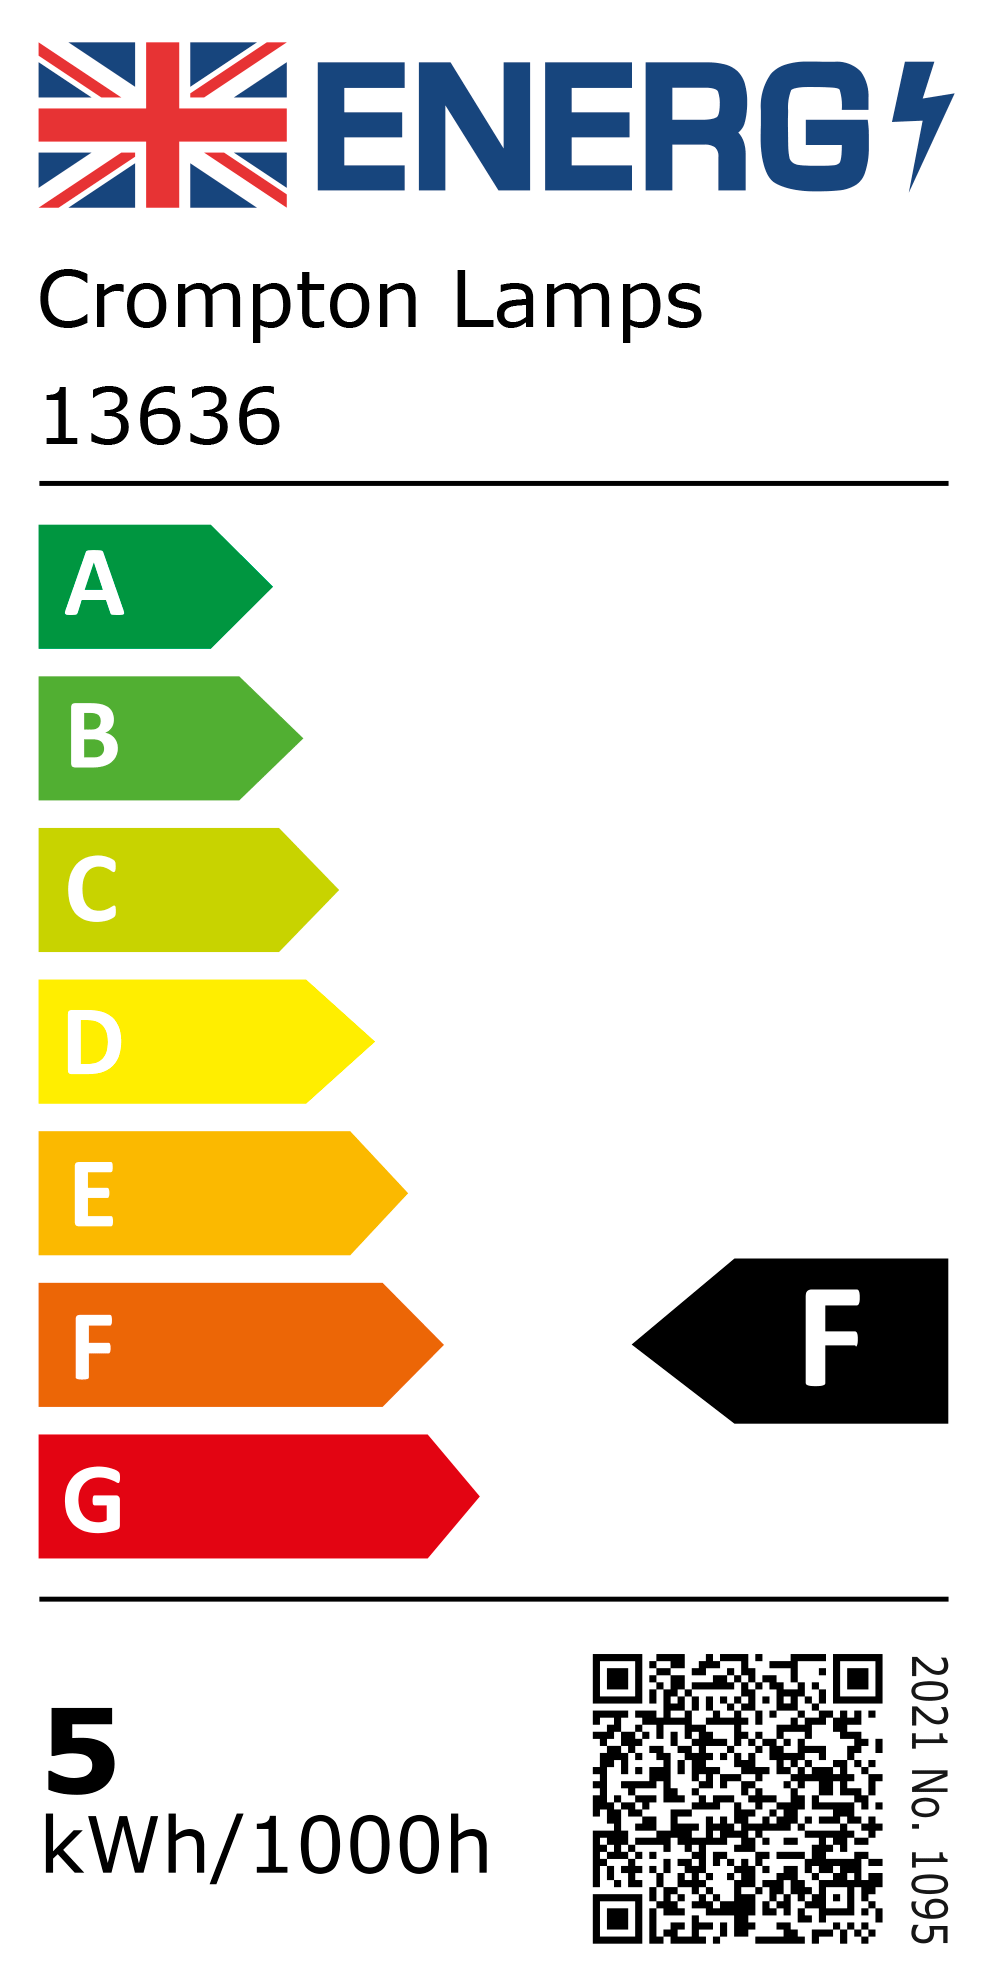 New 2021 Energy Rating Label: Stock Code 13636